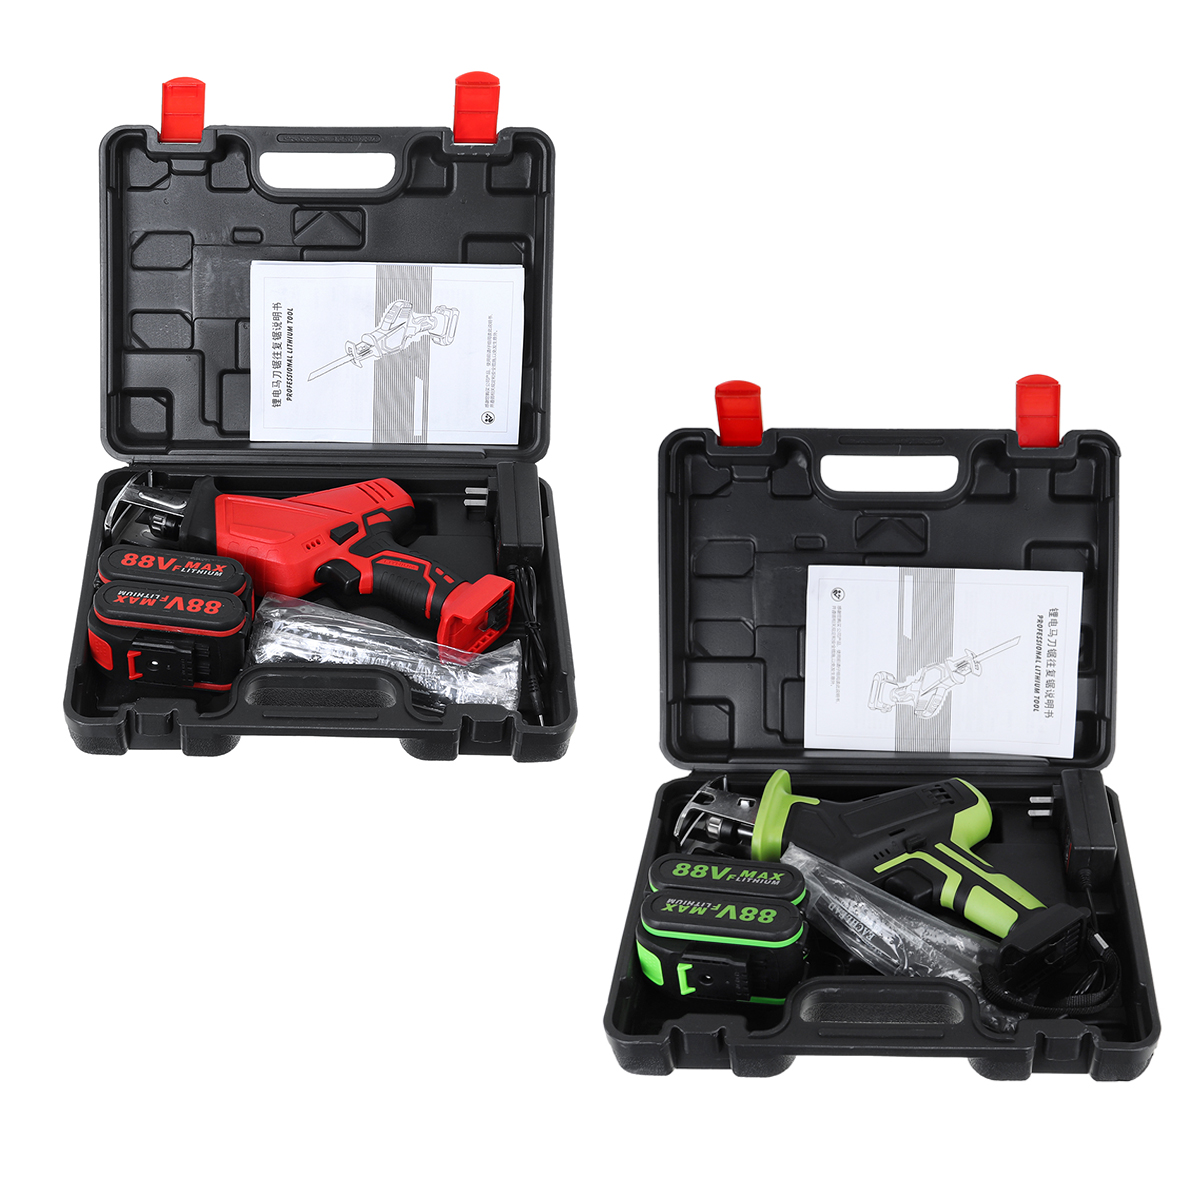 21V-88VF-Electric-Saw-Cordless-Charging-Reciprocating-Saw-Kit-LED-Light-2-Battery-Wood-Cutter-Set-1670502-1